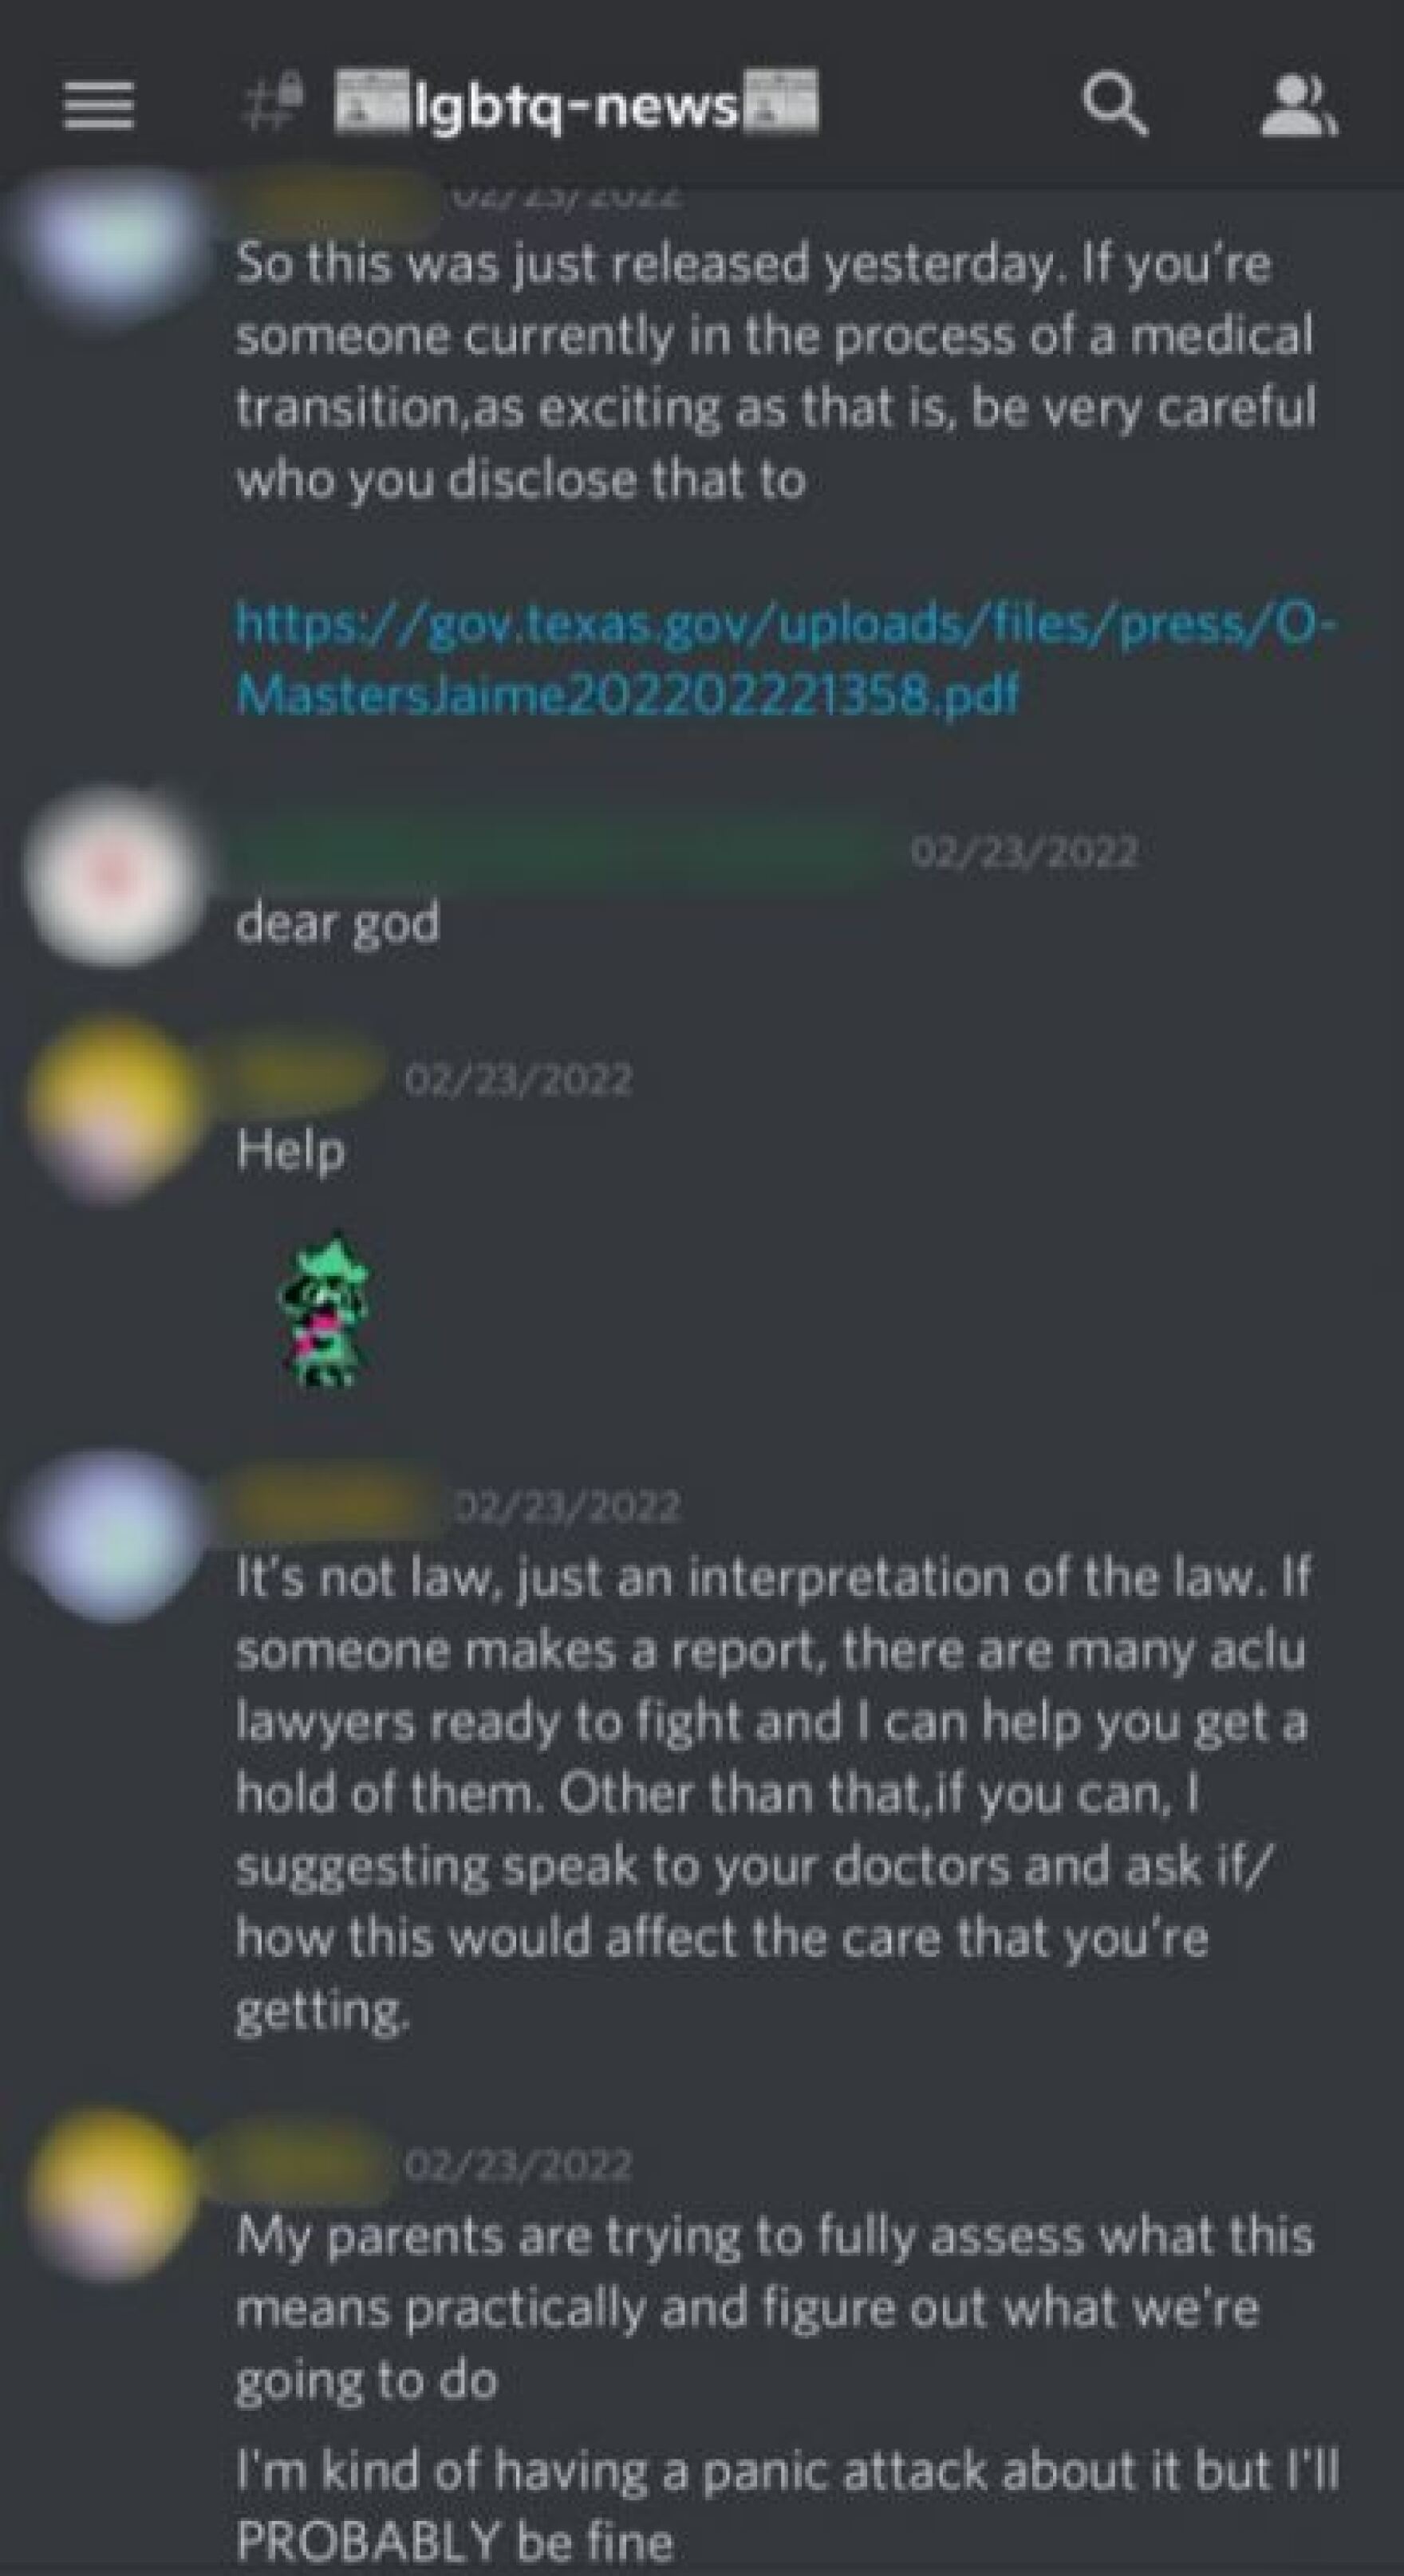 a screenshot of a discord chat. it reads 'person 1: so this was just released yesterday. if you're someone currently in the process of a medical transition, as excited as that is, be very careful who you disclose that to (a link is including to a texas government website below.) person 2: dear god. person 3: help. person 1: it's not law, just an interpretation of the law. if someone makes a report, there are many aclu lawyers ready to fight and i can help you get a hold of them. other than that, if you can i suggesting speak to your doctors and ask if/how this would affect the care that you're getting. person 3: my parents are trying to fully assess what this means practically and figure out what we're going to do. i'm kind of having a panic attack about but i'll probably be fine."